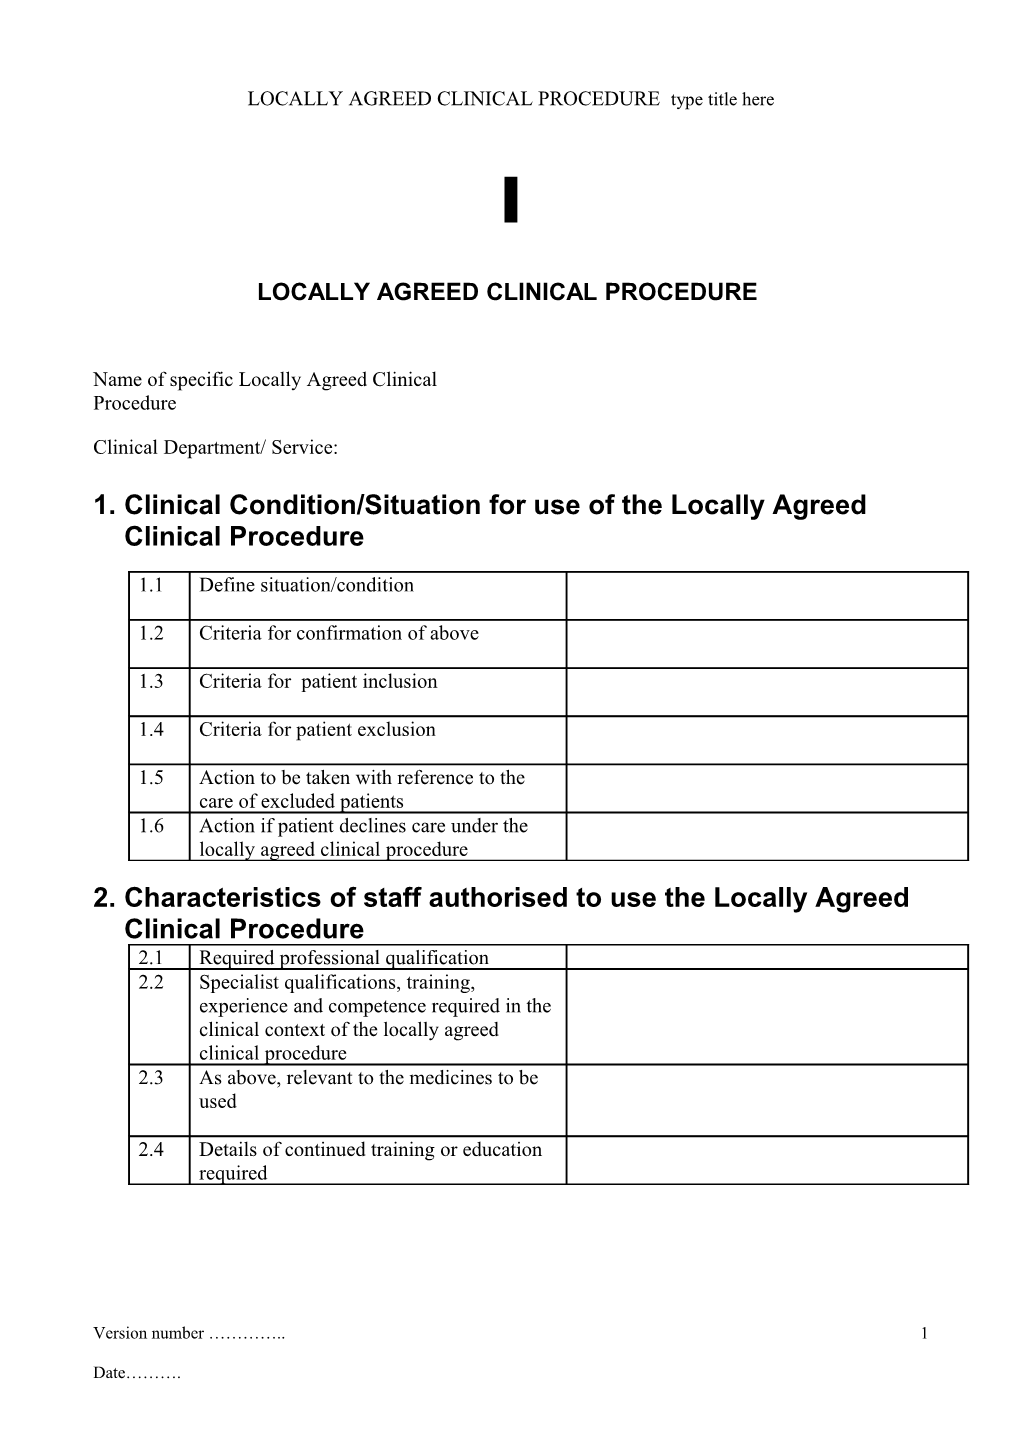 LOCALLY AGREED CLINICAL PROCEDURE Type Title Here